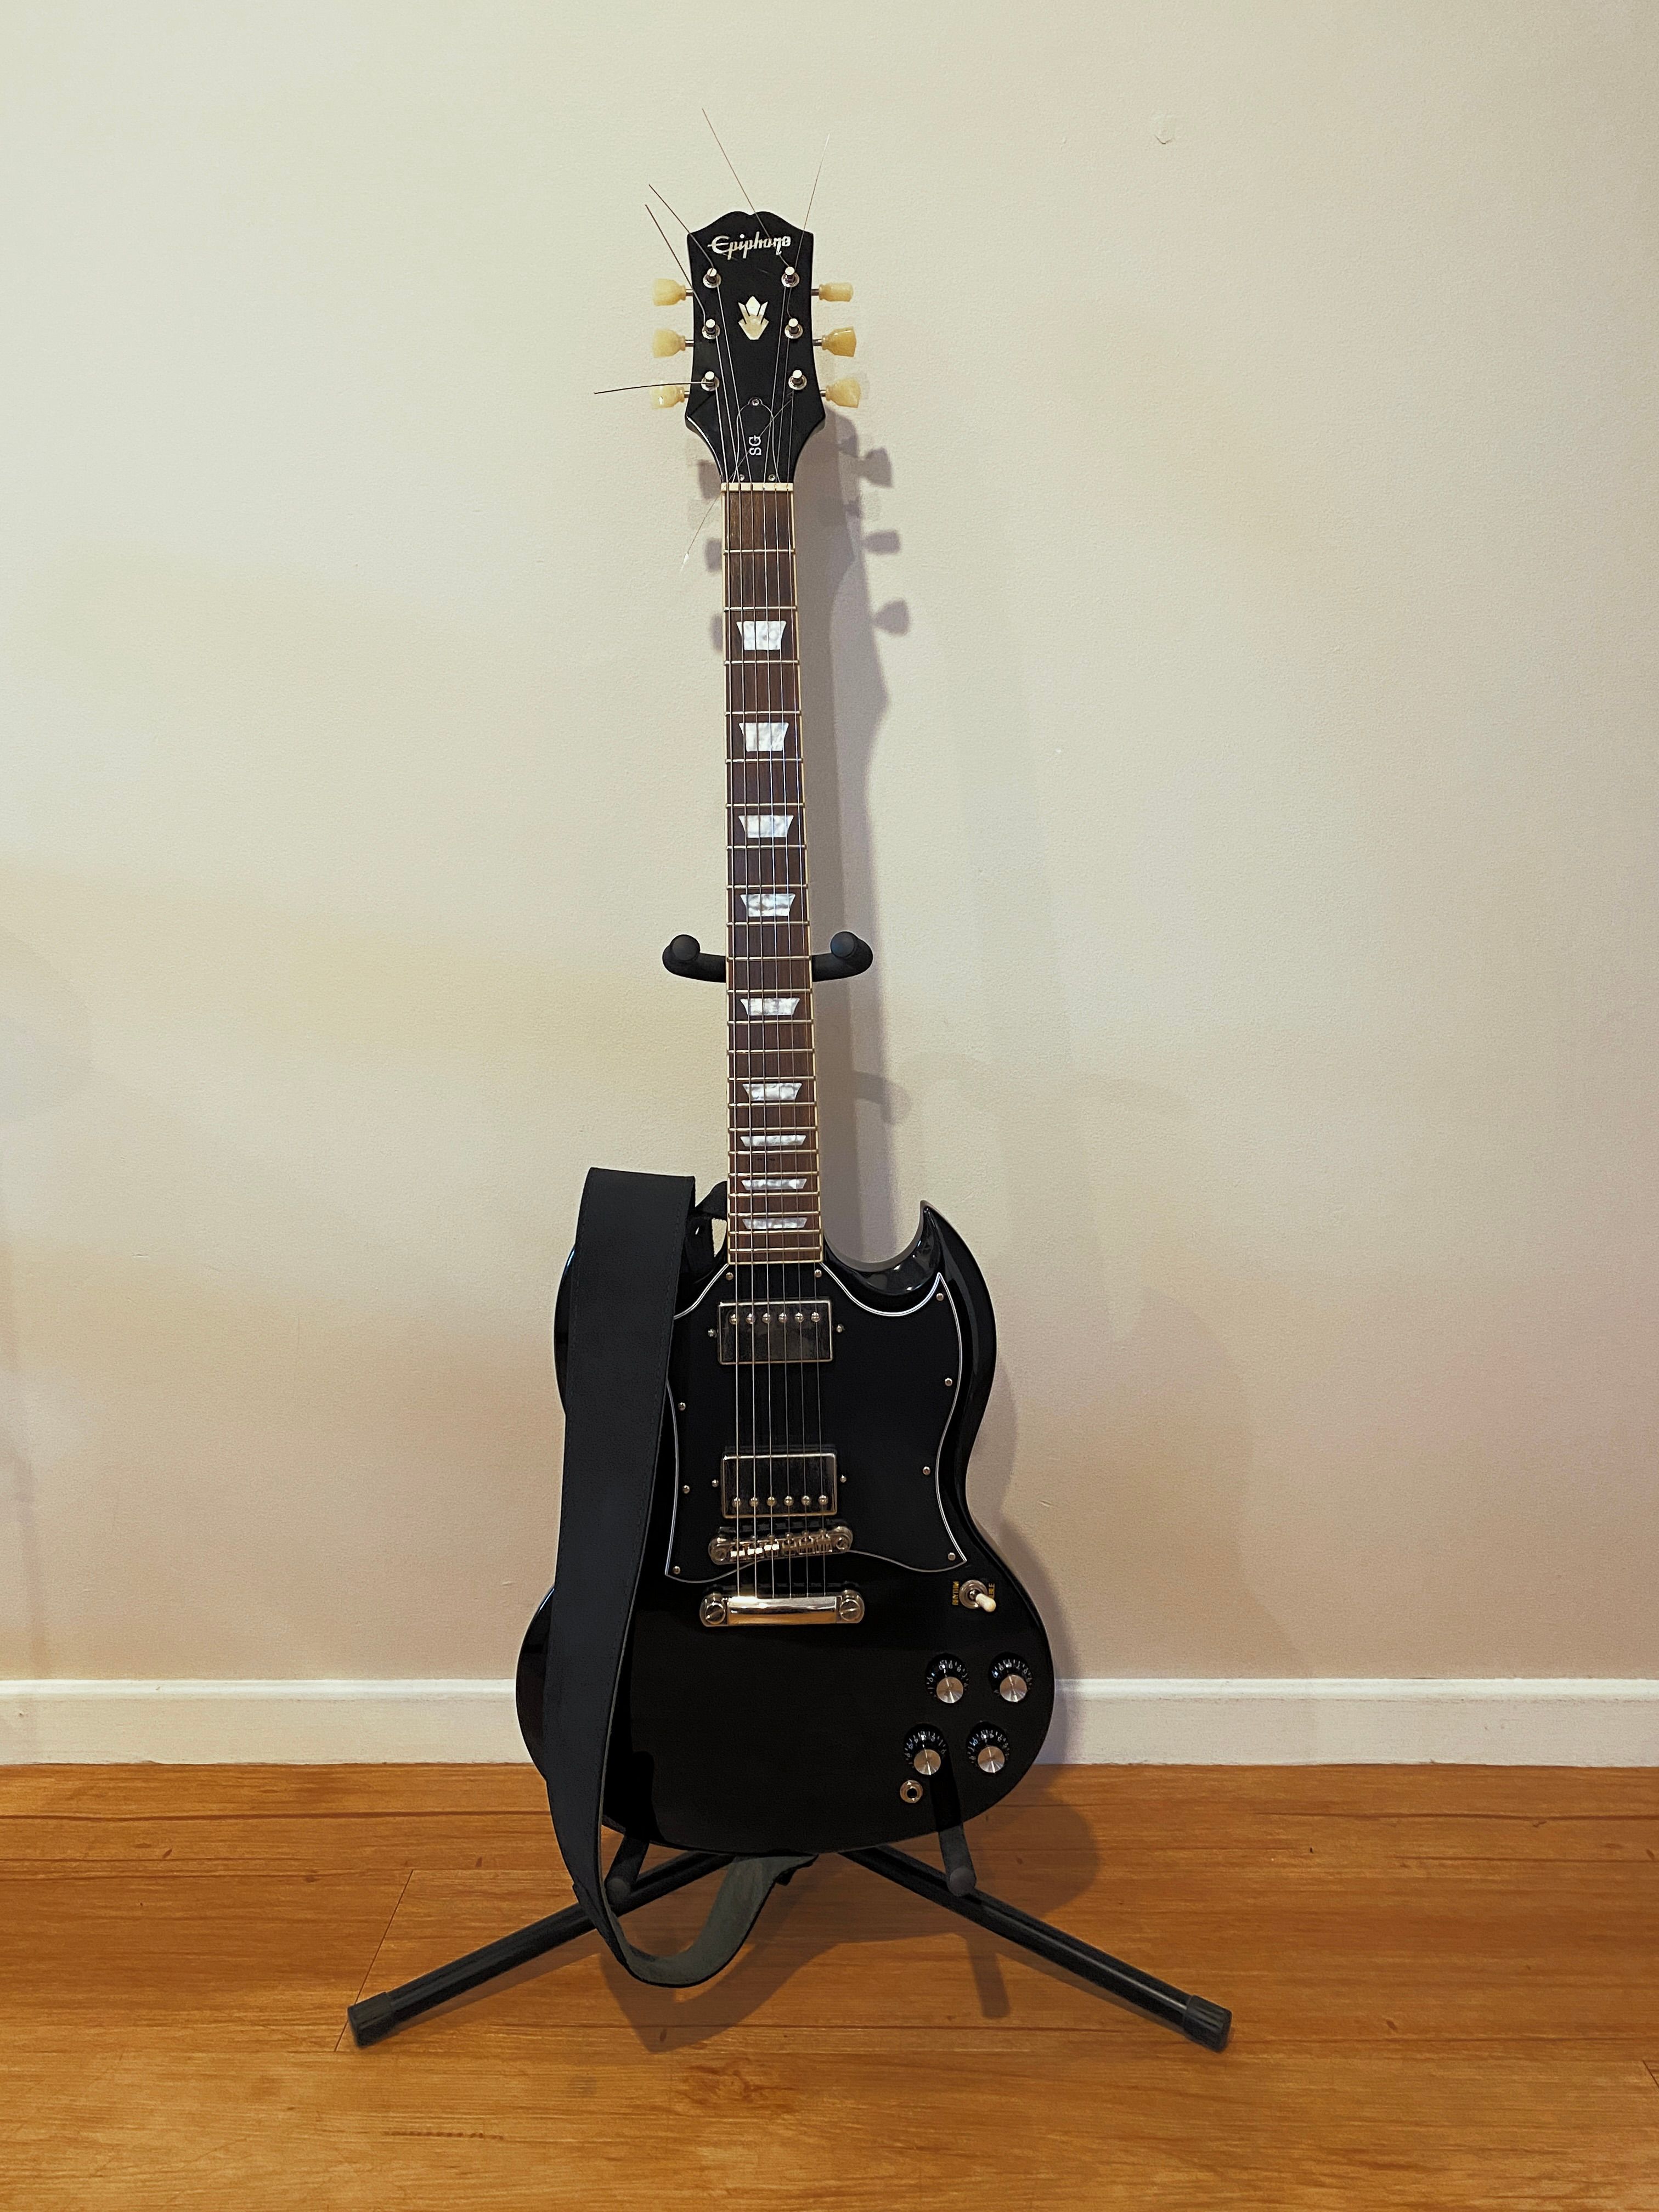 A photo of a shiny black electric guitar sitting on a guitar stand.